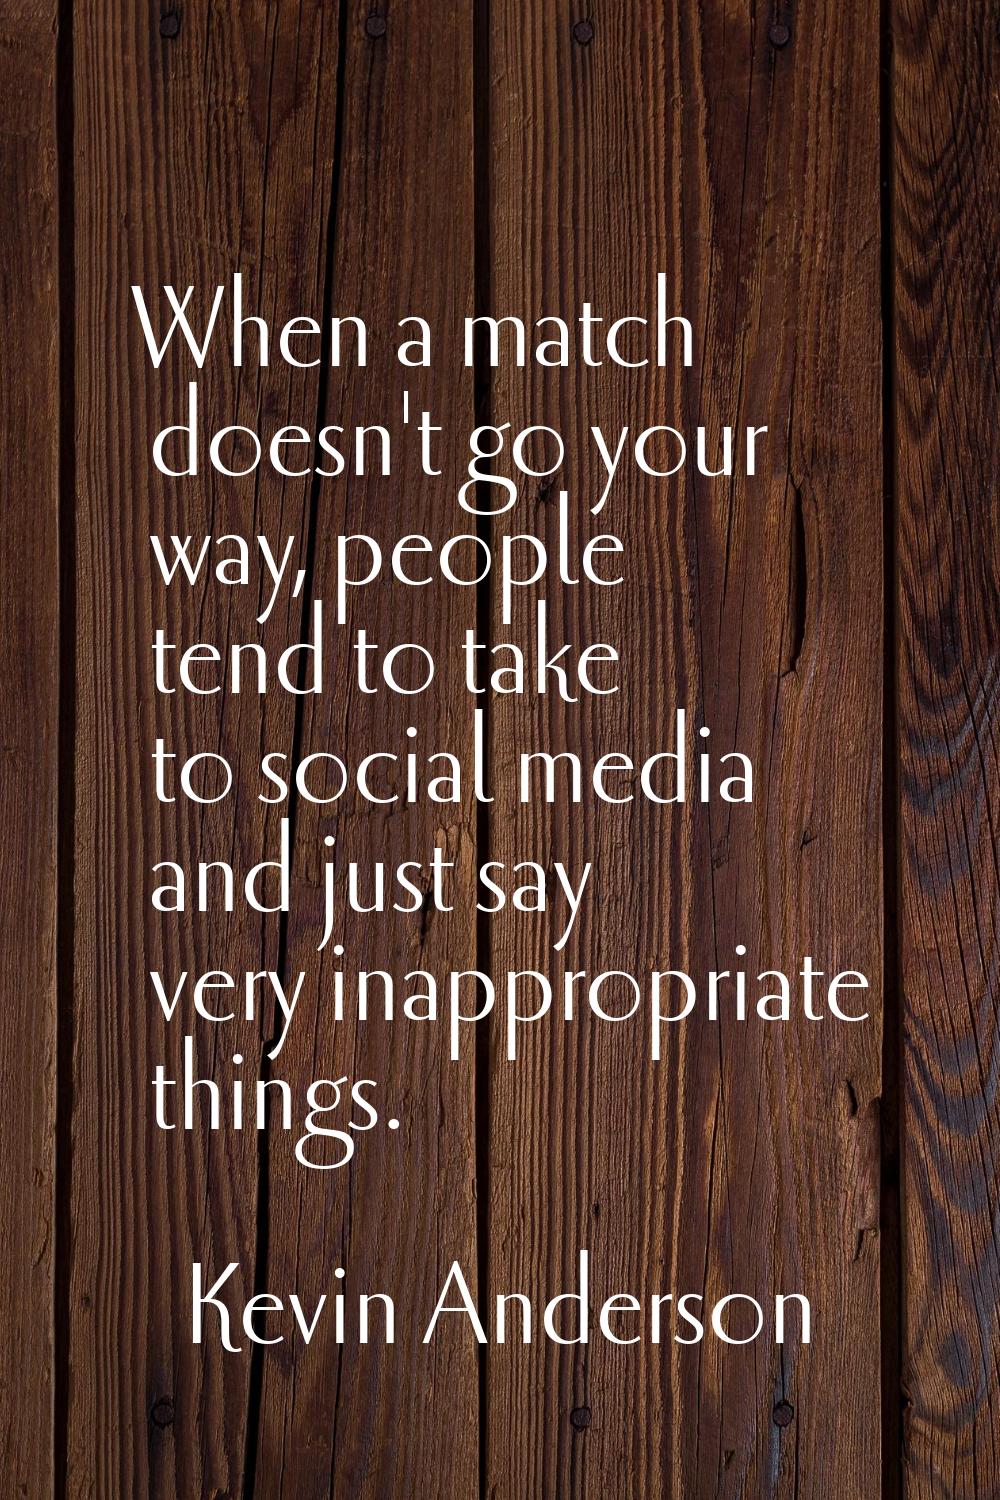 When a match doesn't go your way, people tend to take to social media and just say very inappropria